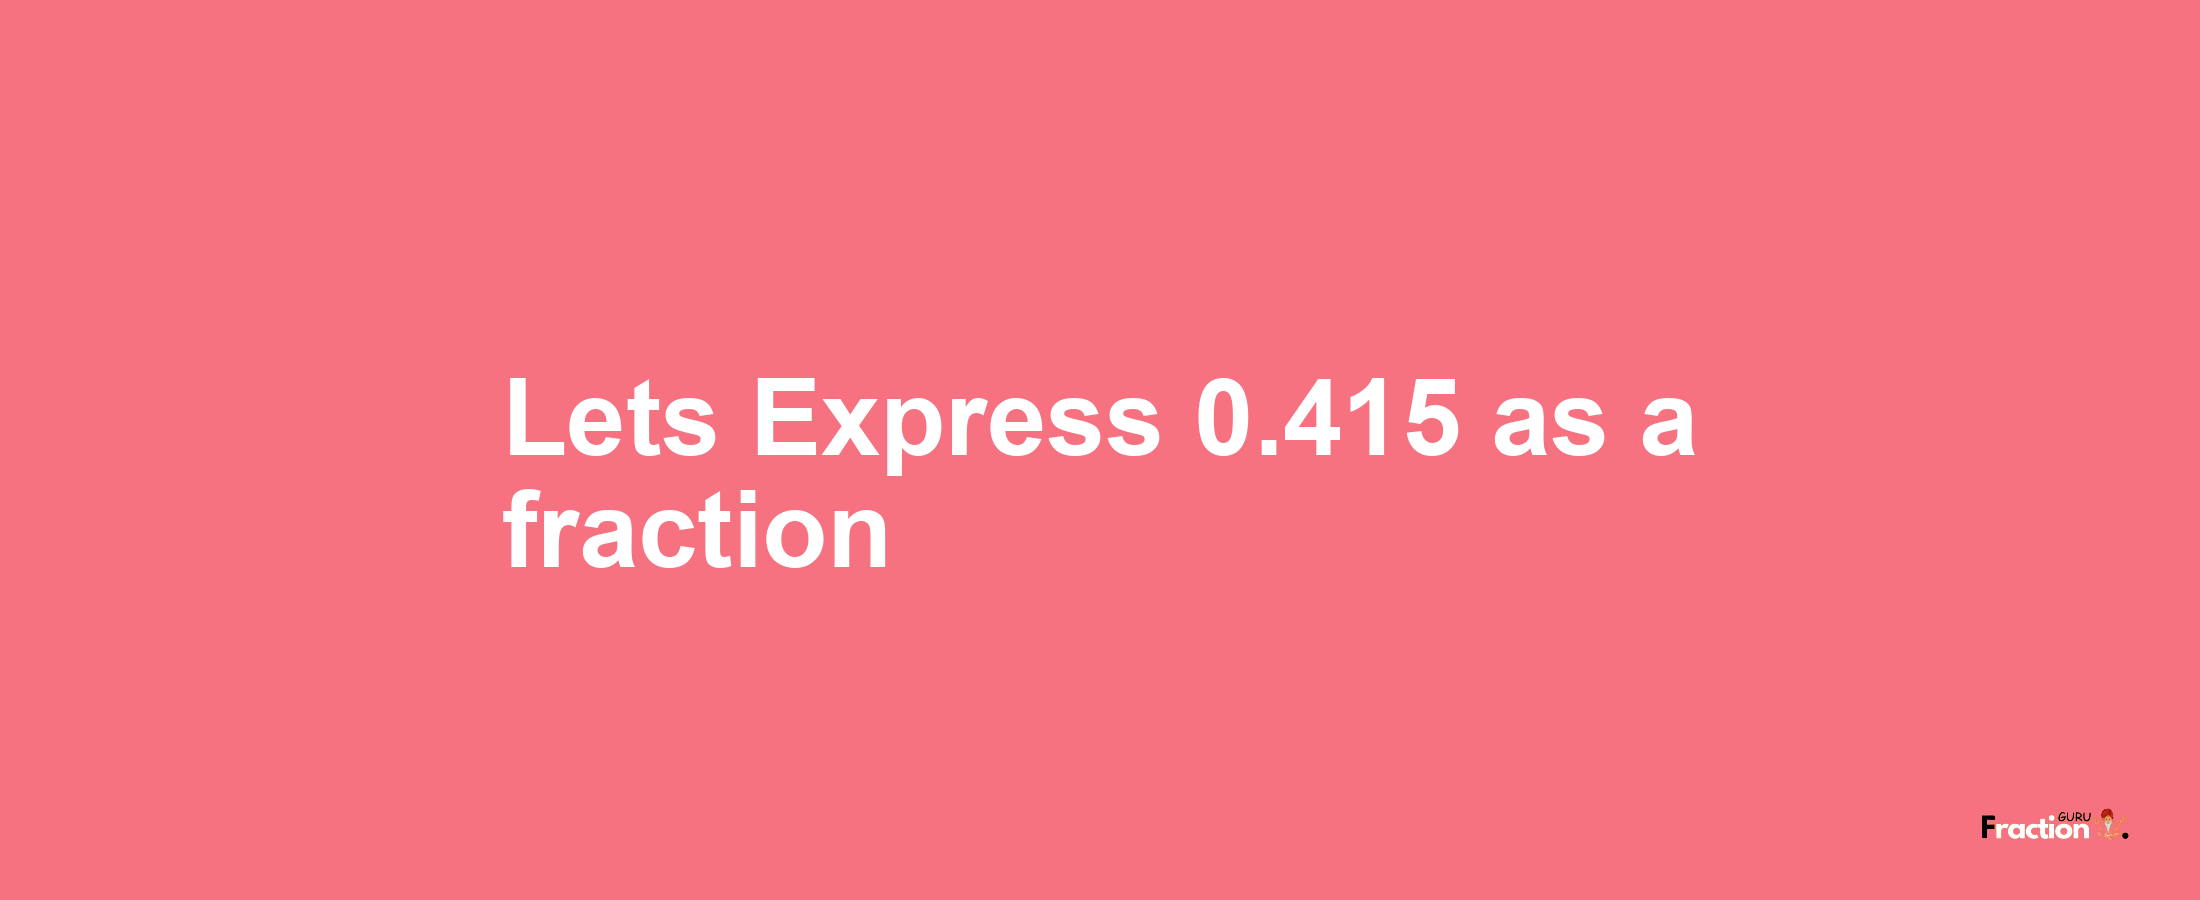 Lets Express 0.415 as afraction